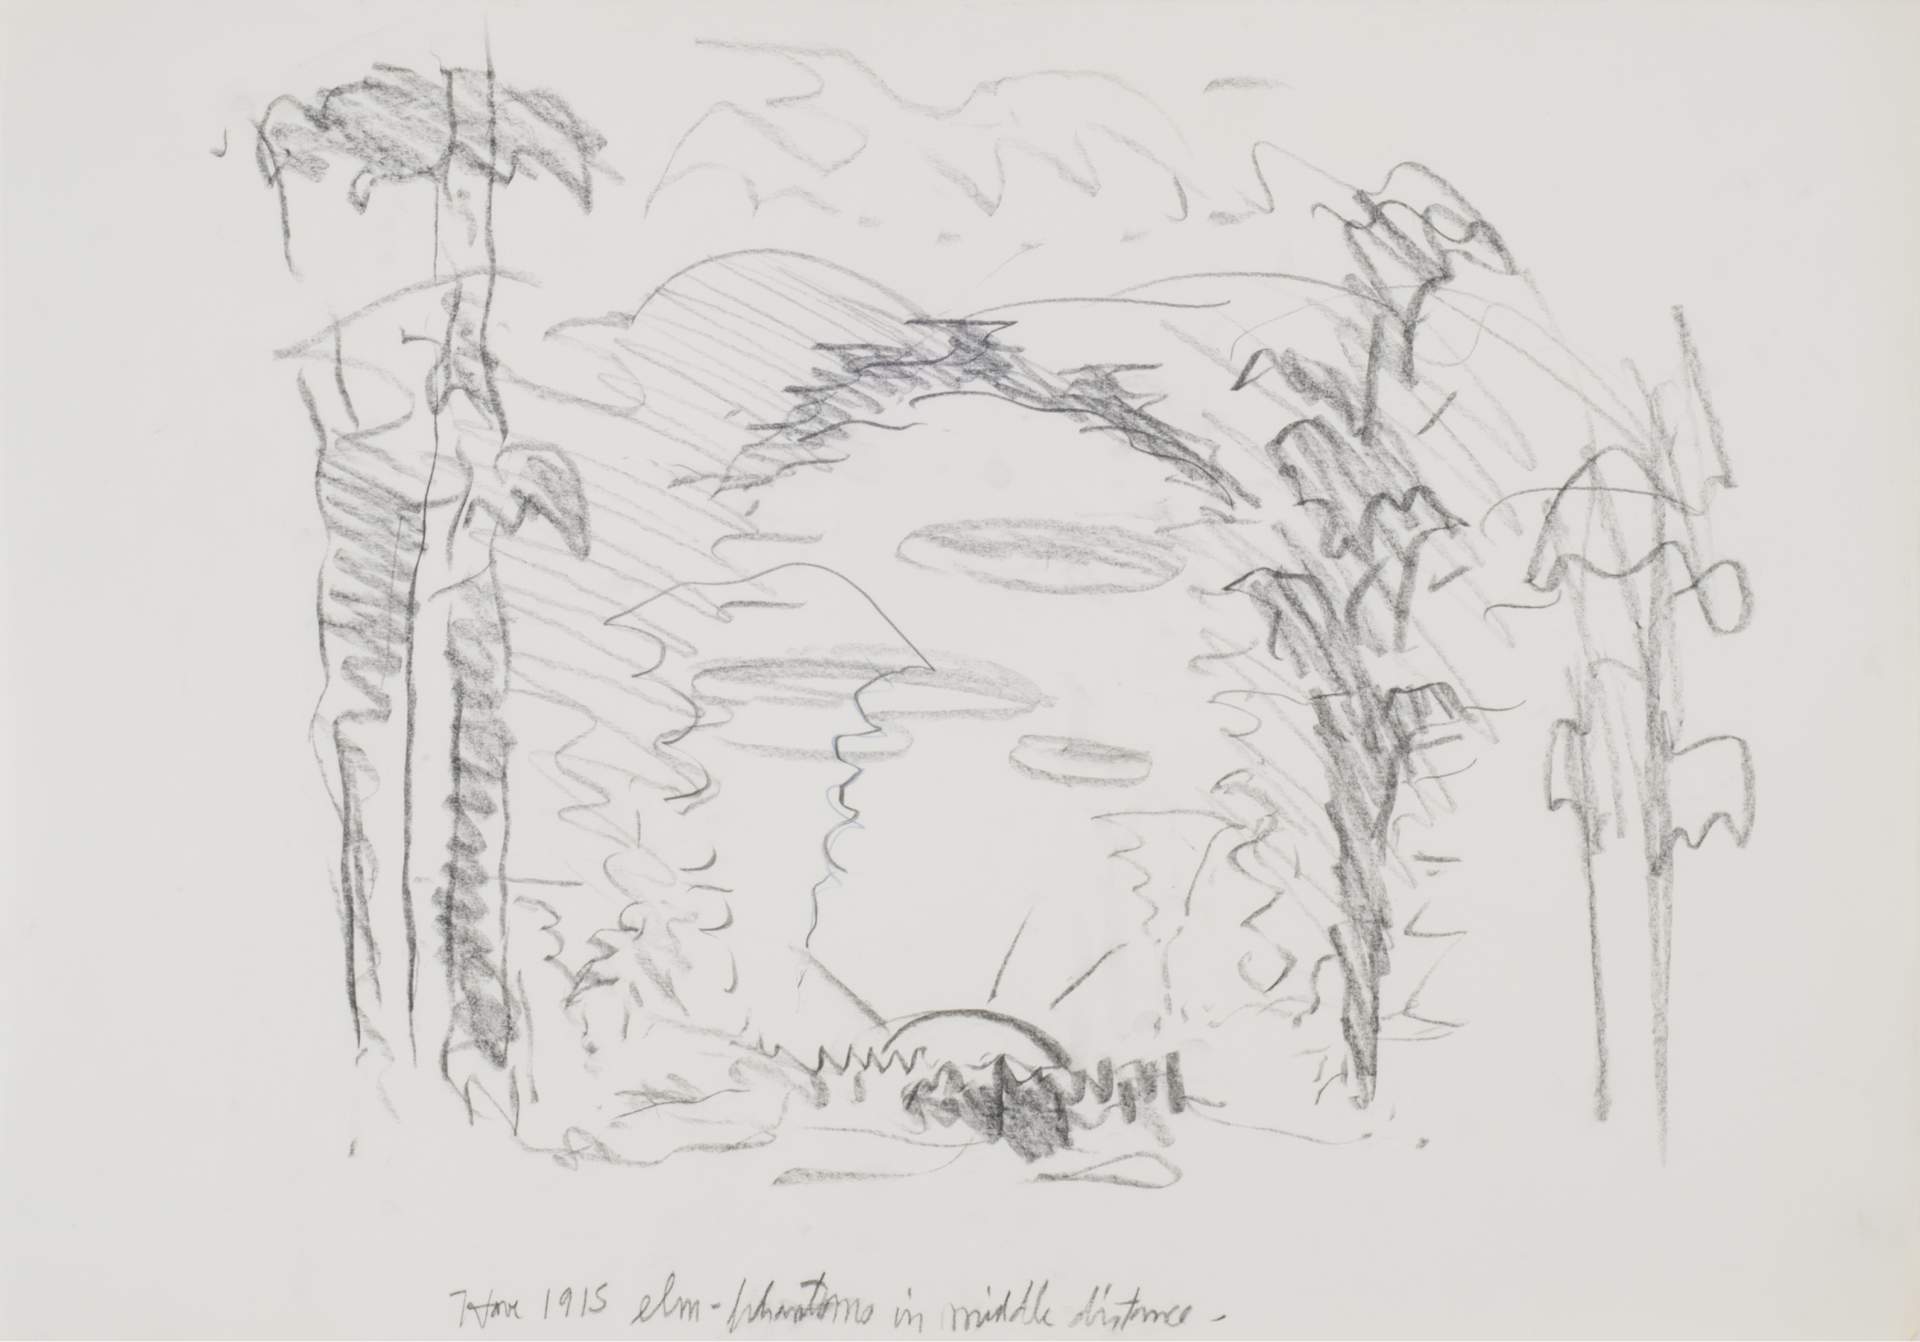 Untitled [sketch with notation: “Have 1915 elm-phantoms in middle distance –”]